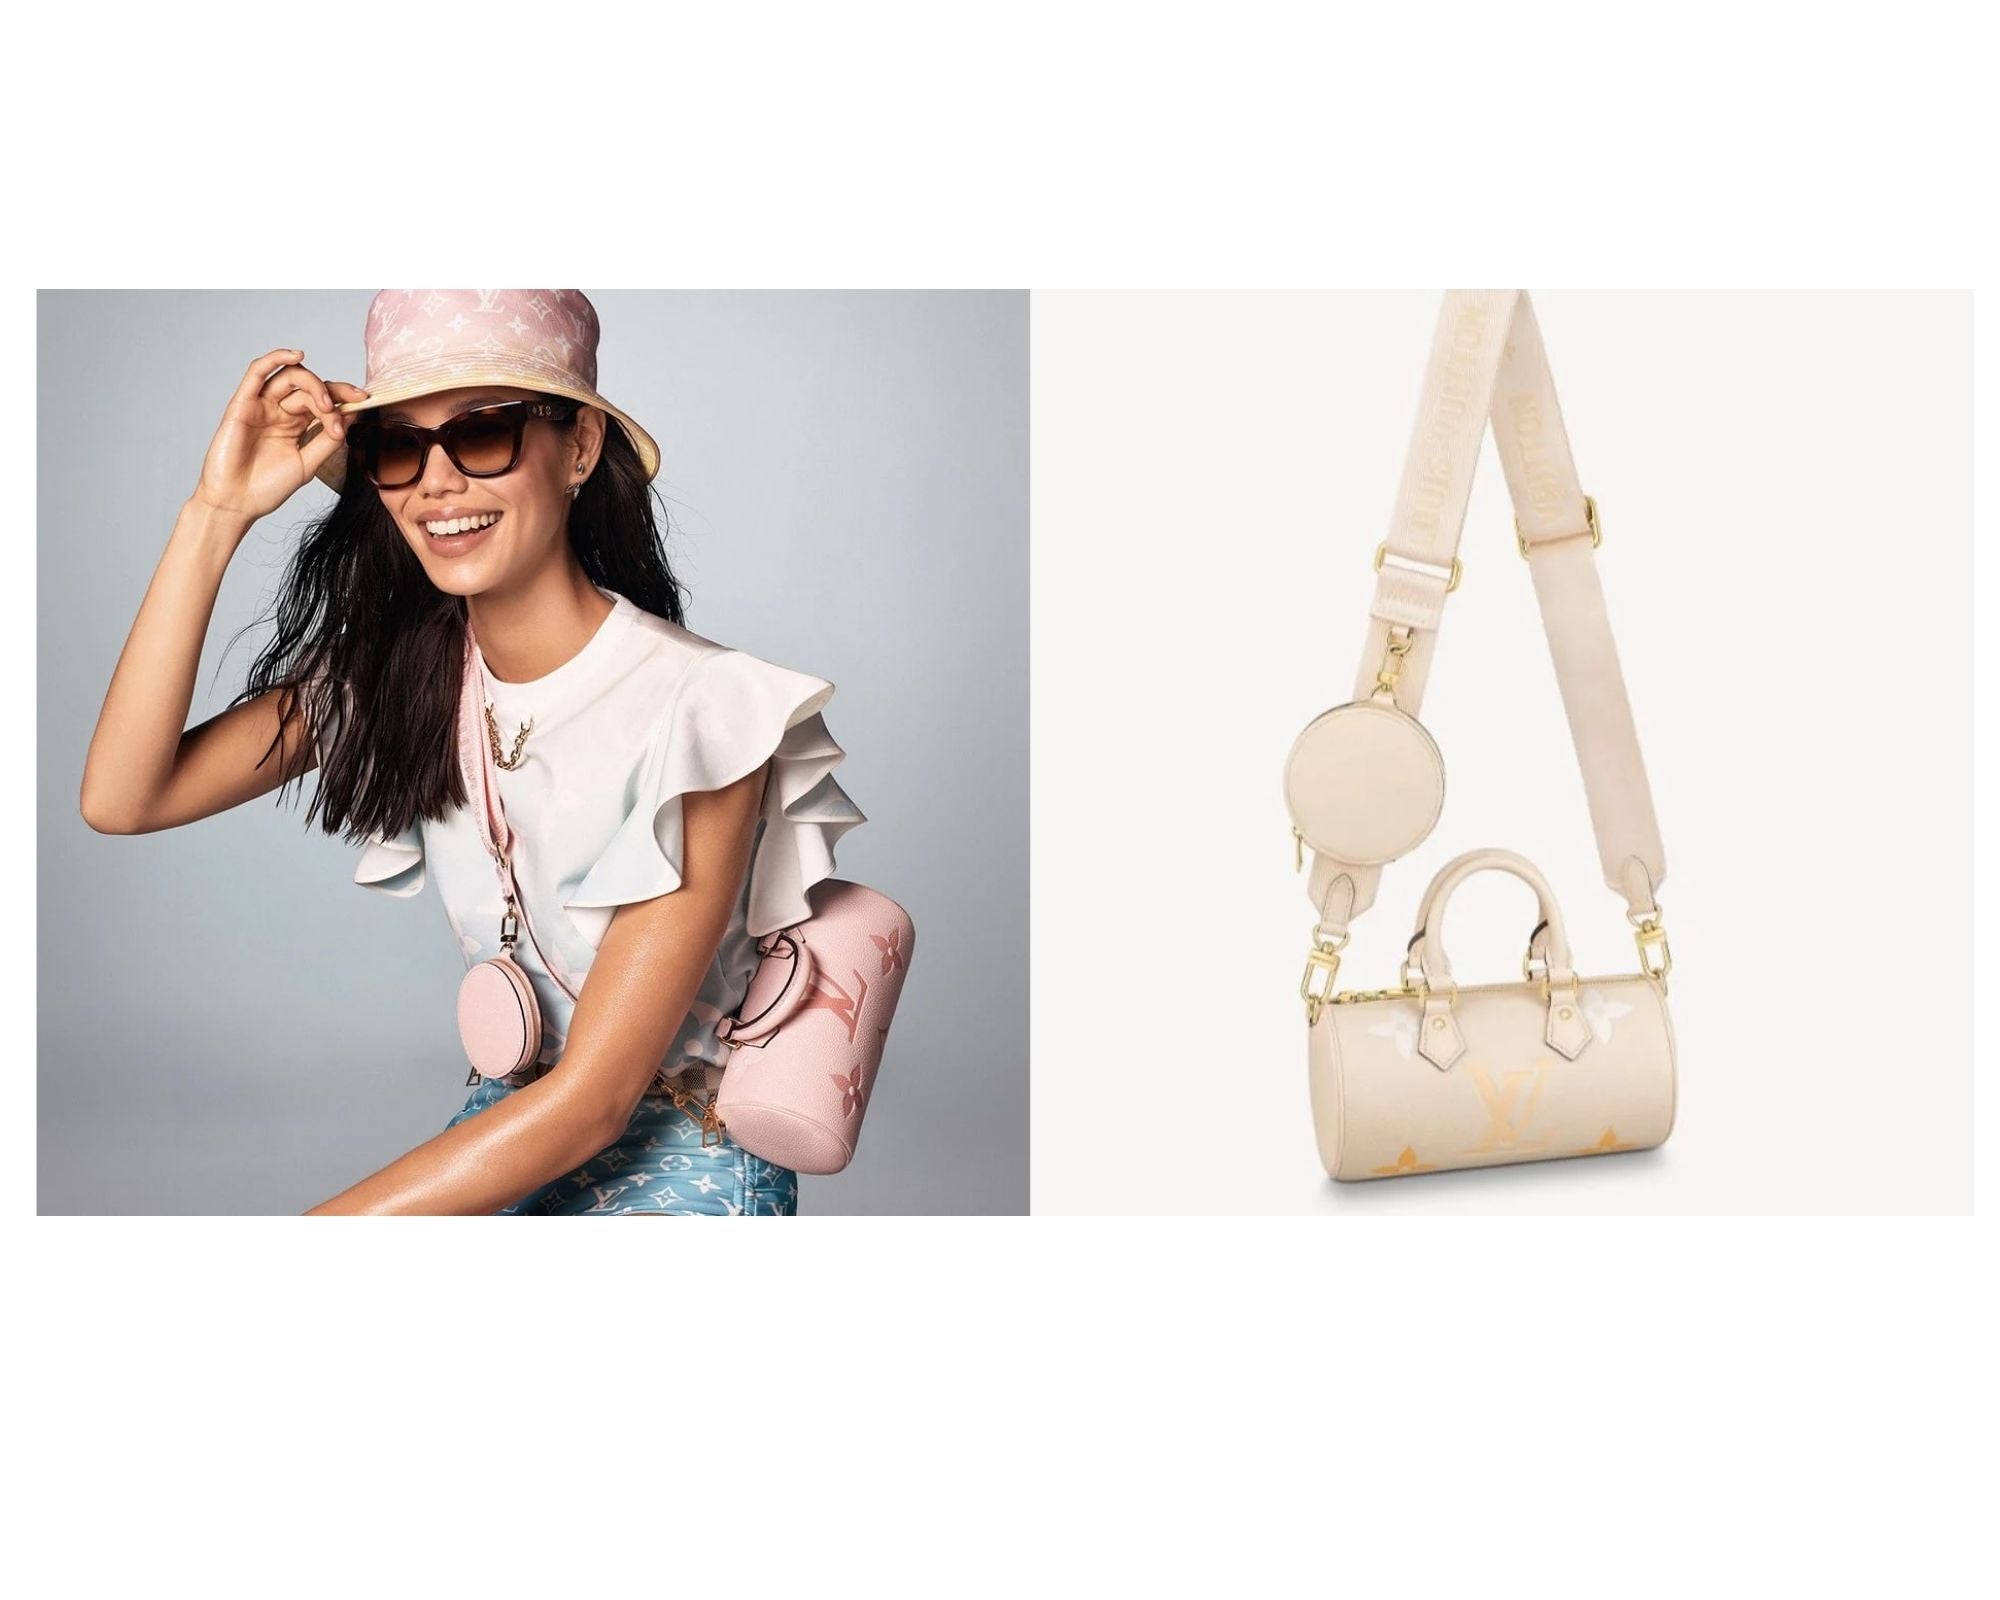 Louis Vuitton By The Pool Collection: The Epitome of Summer Style – LuxUness